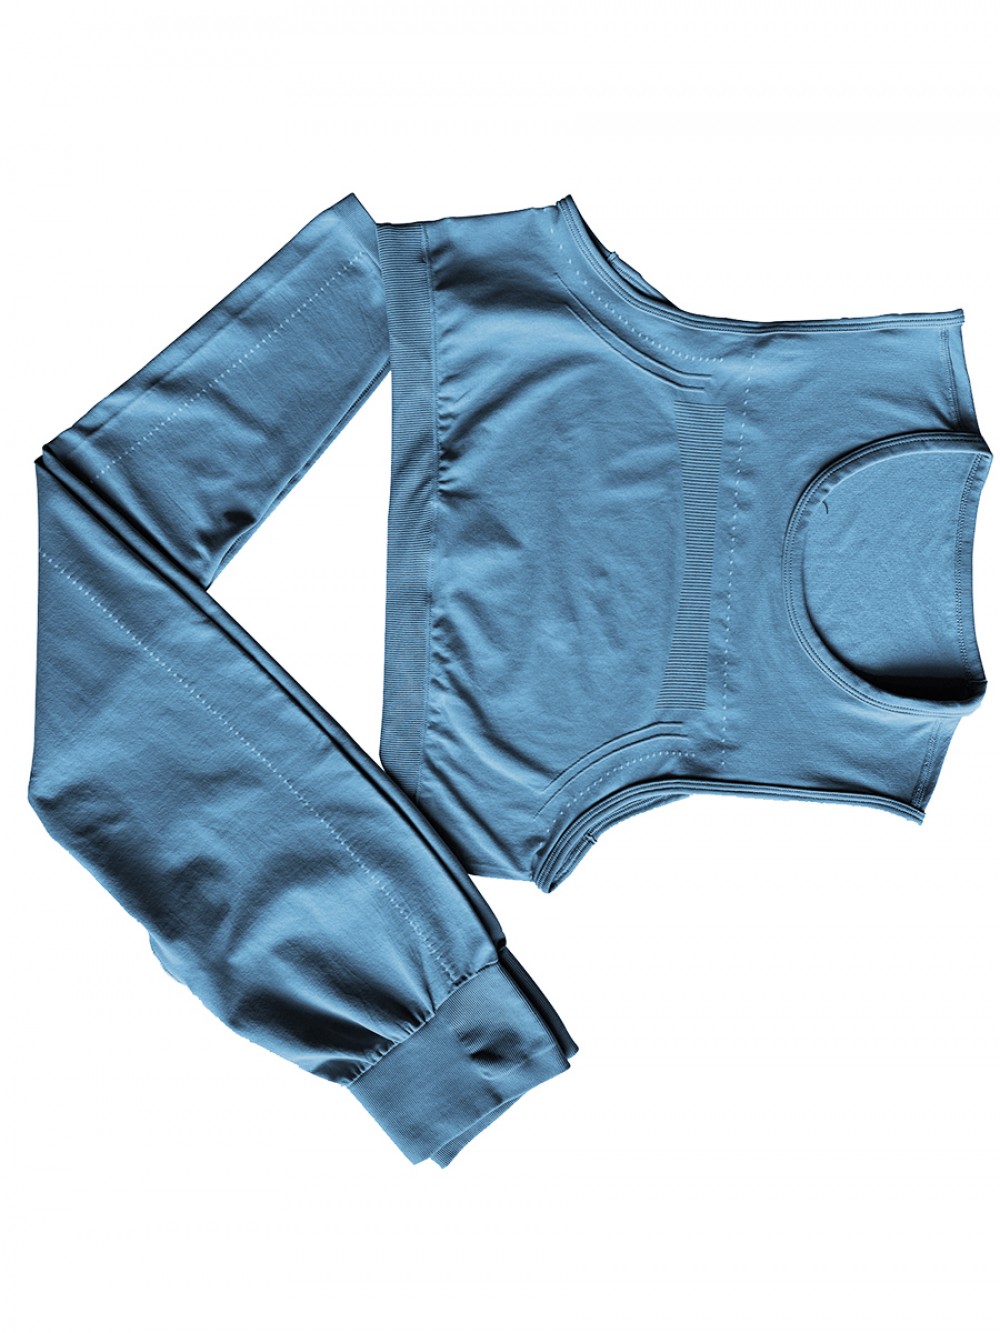 Sky Blue Running Suit Ruched Round Collar Seamless Elastic Material